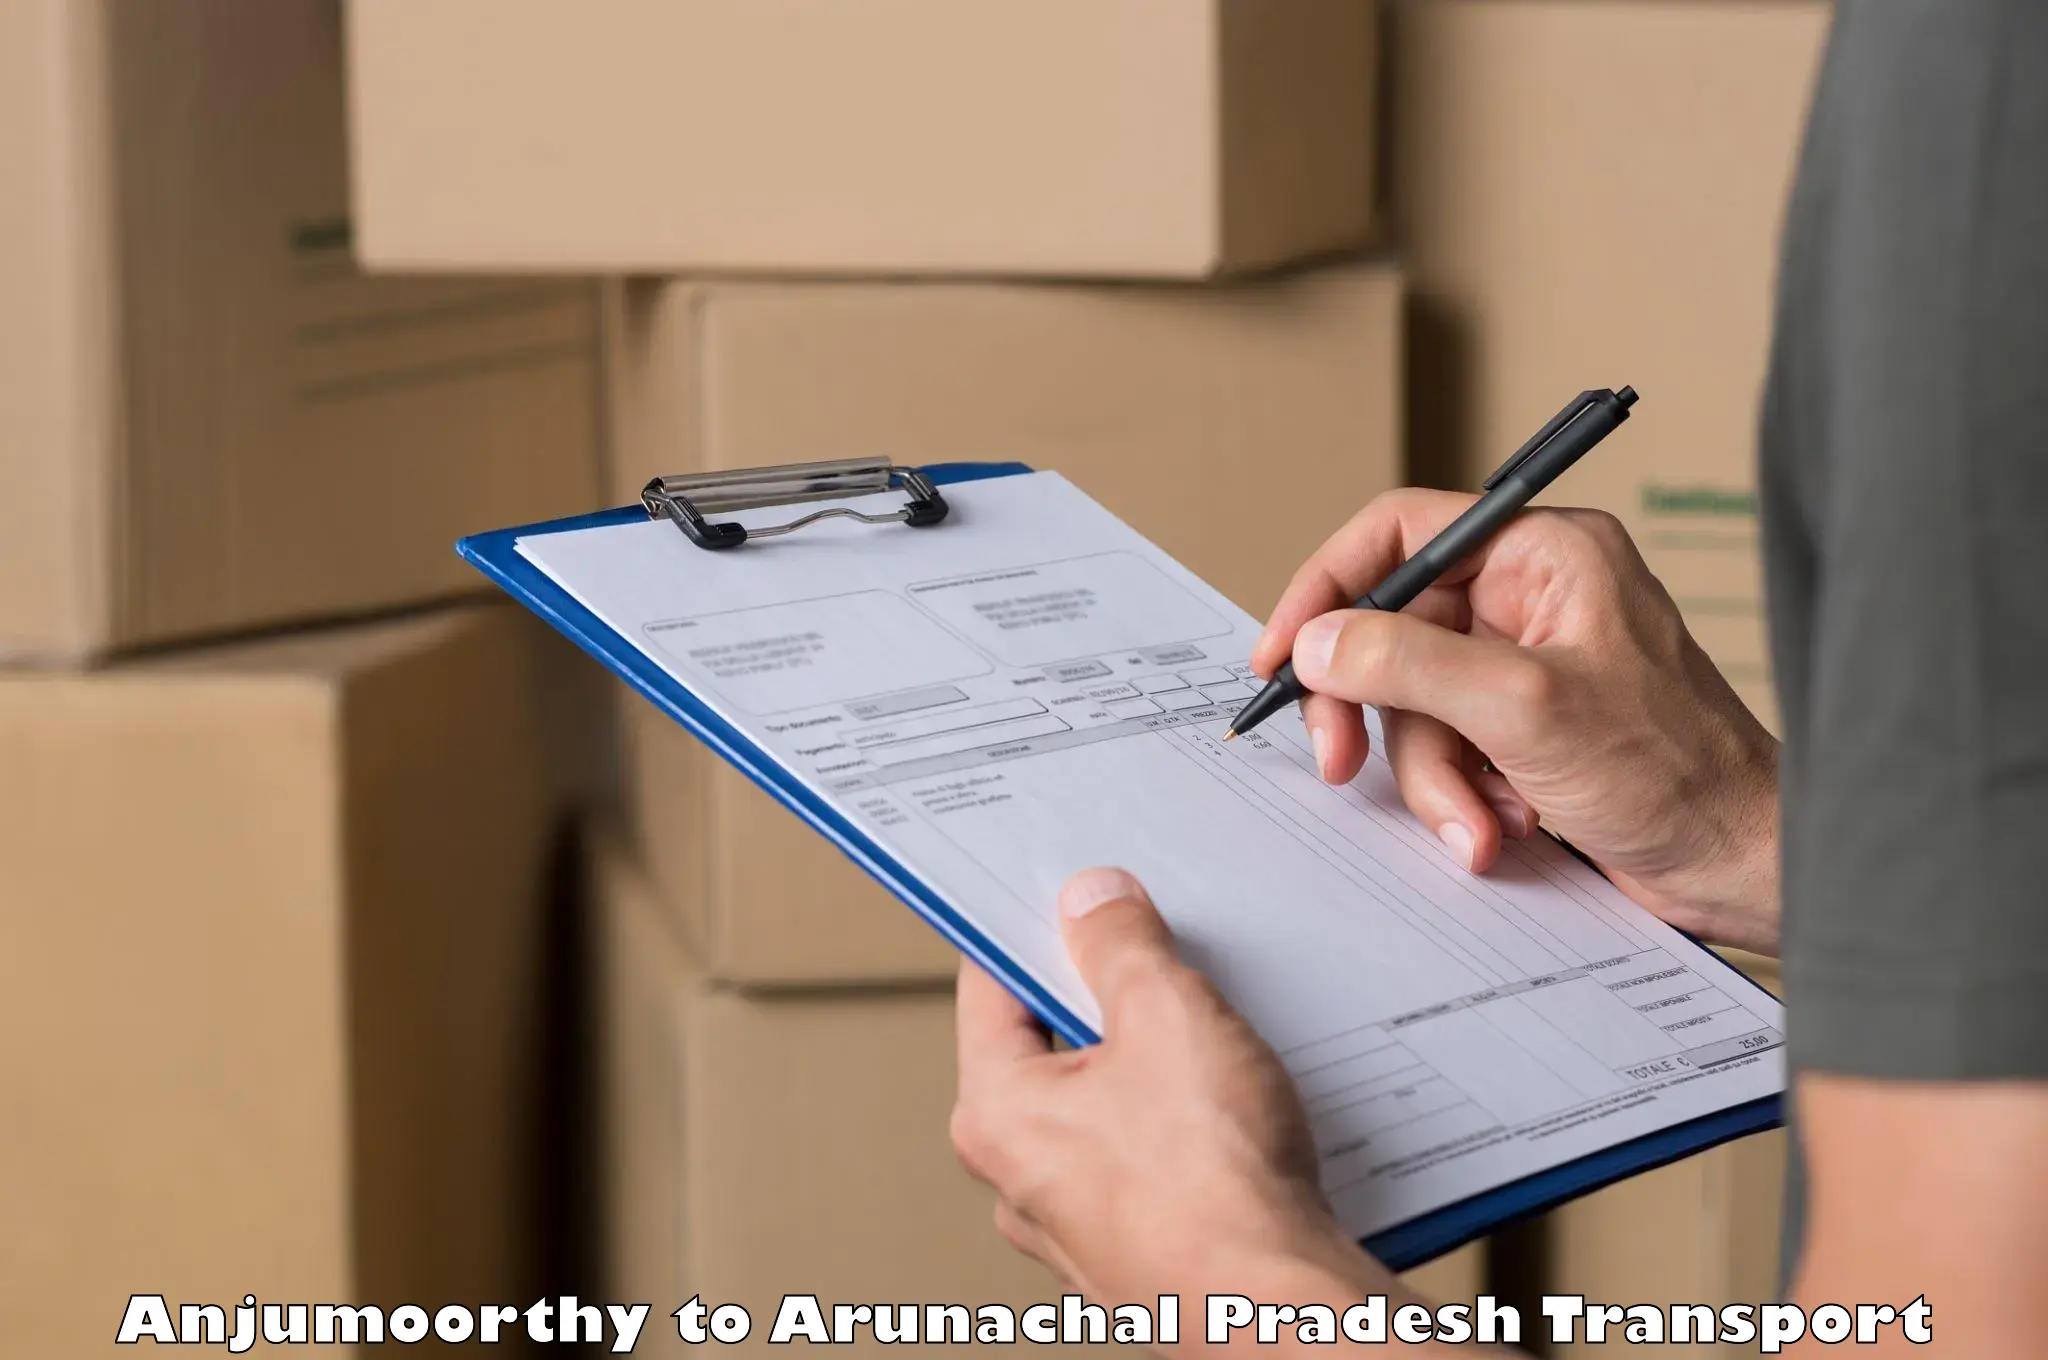 Commercial transport service Anjumoorthy to Lohit